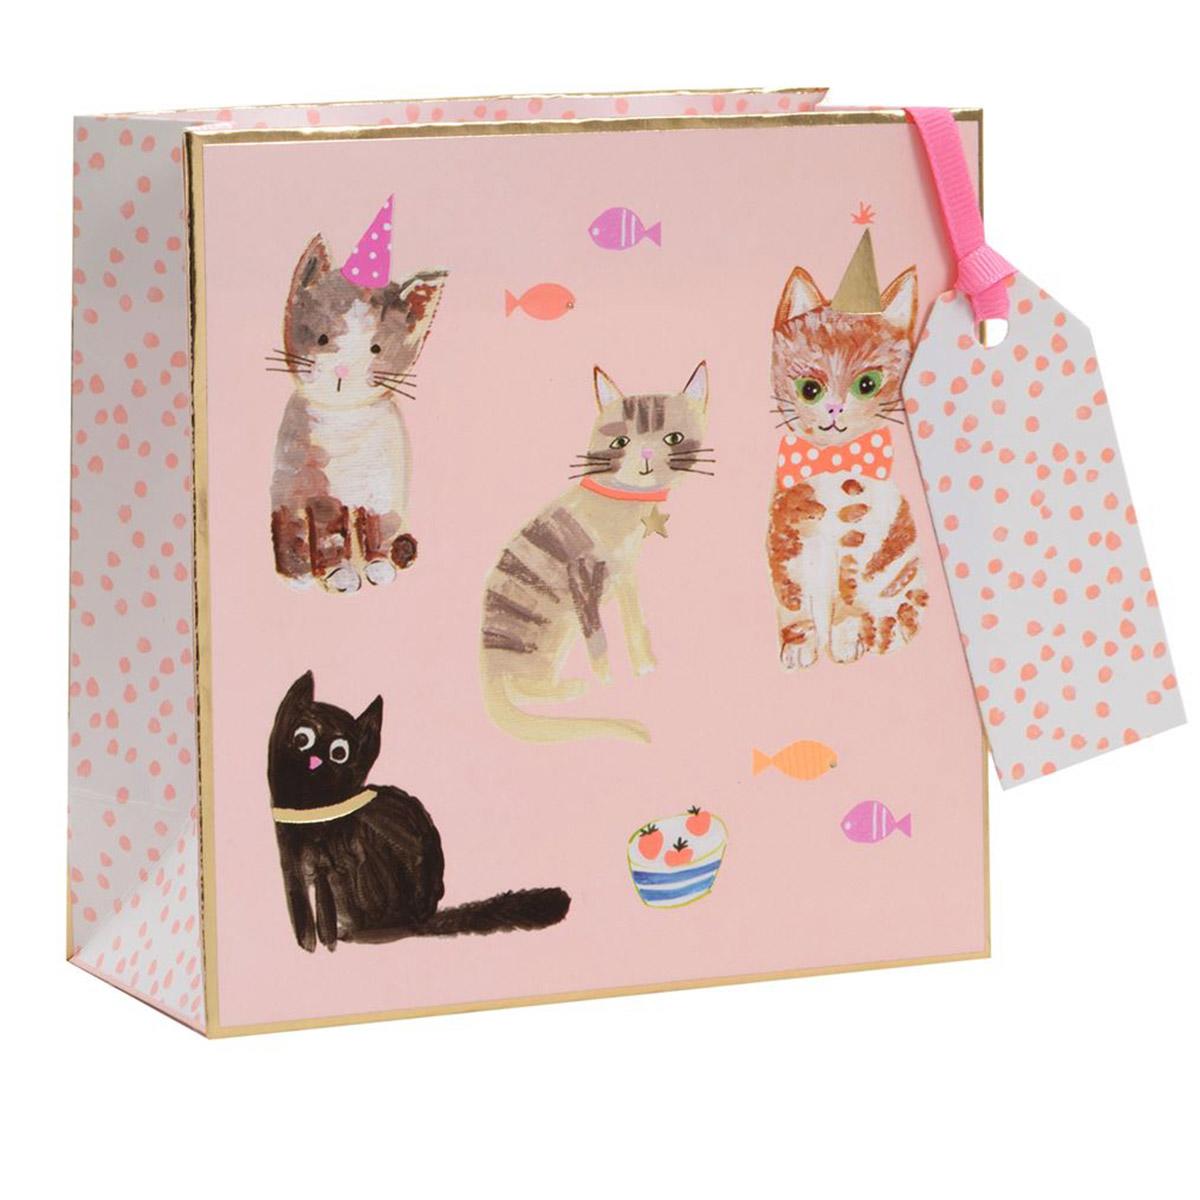 Cats Themed Gift Bag Shown Full Image